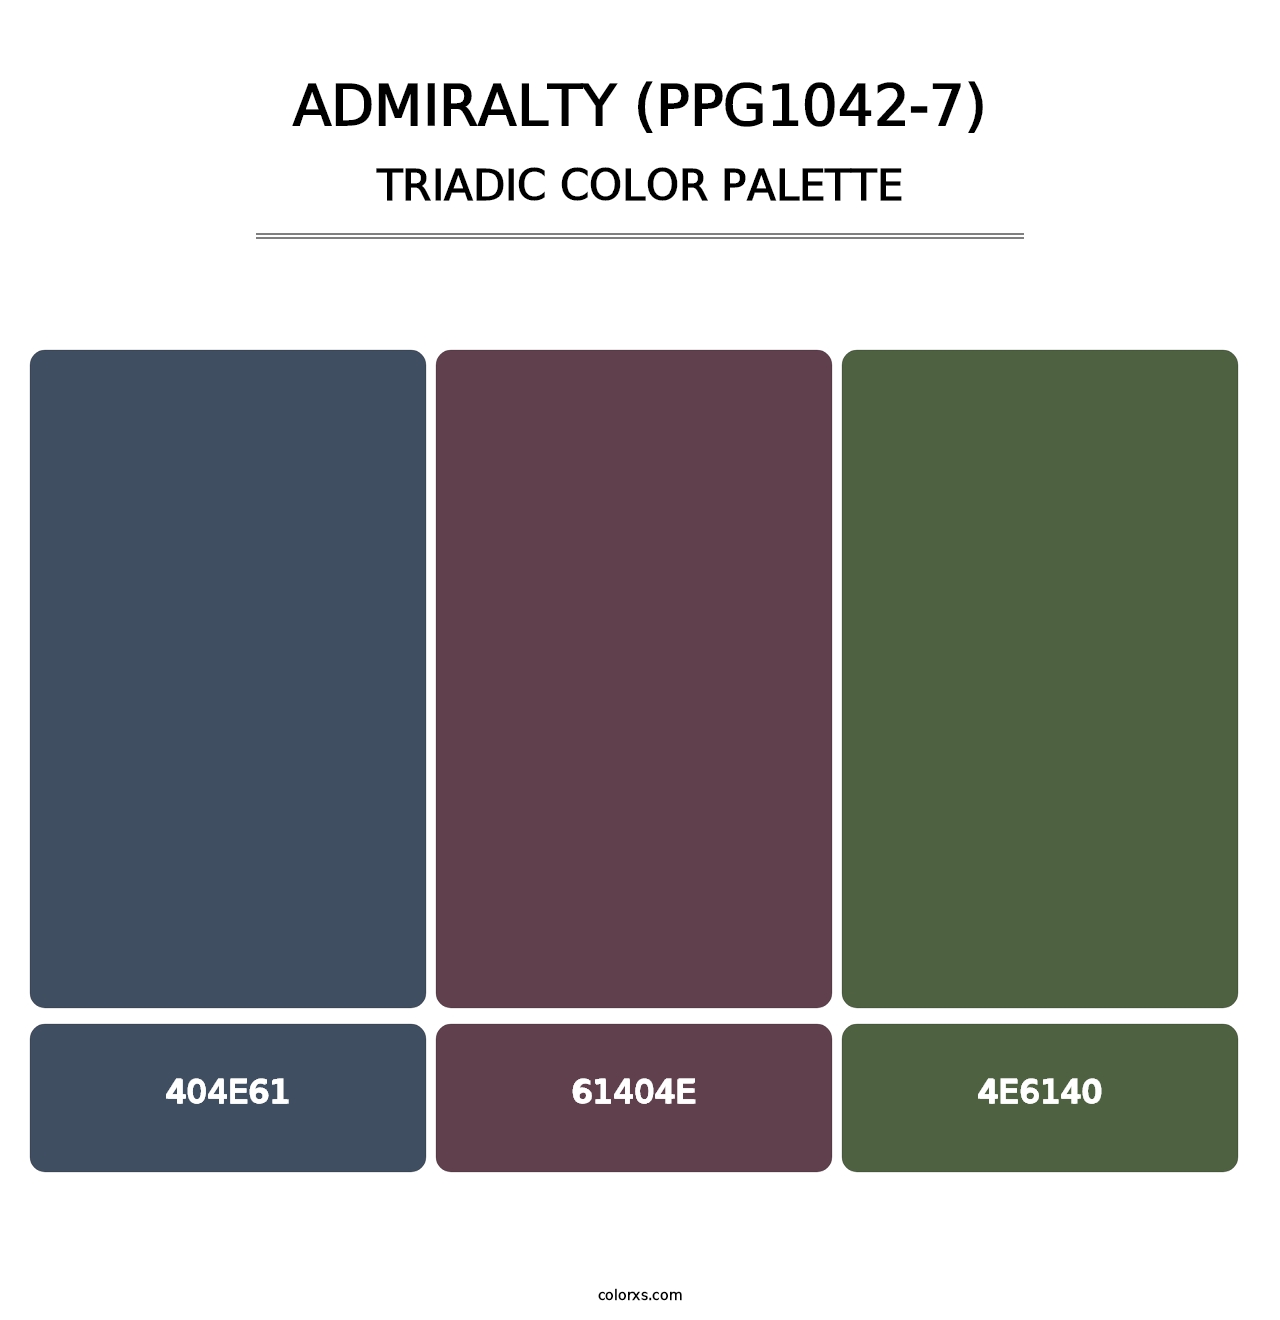 Admiralty (PPG1042-7) - Triadic Color Palette